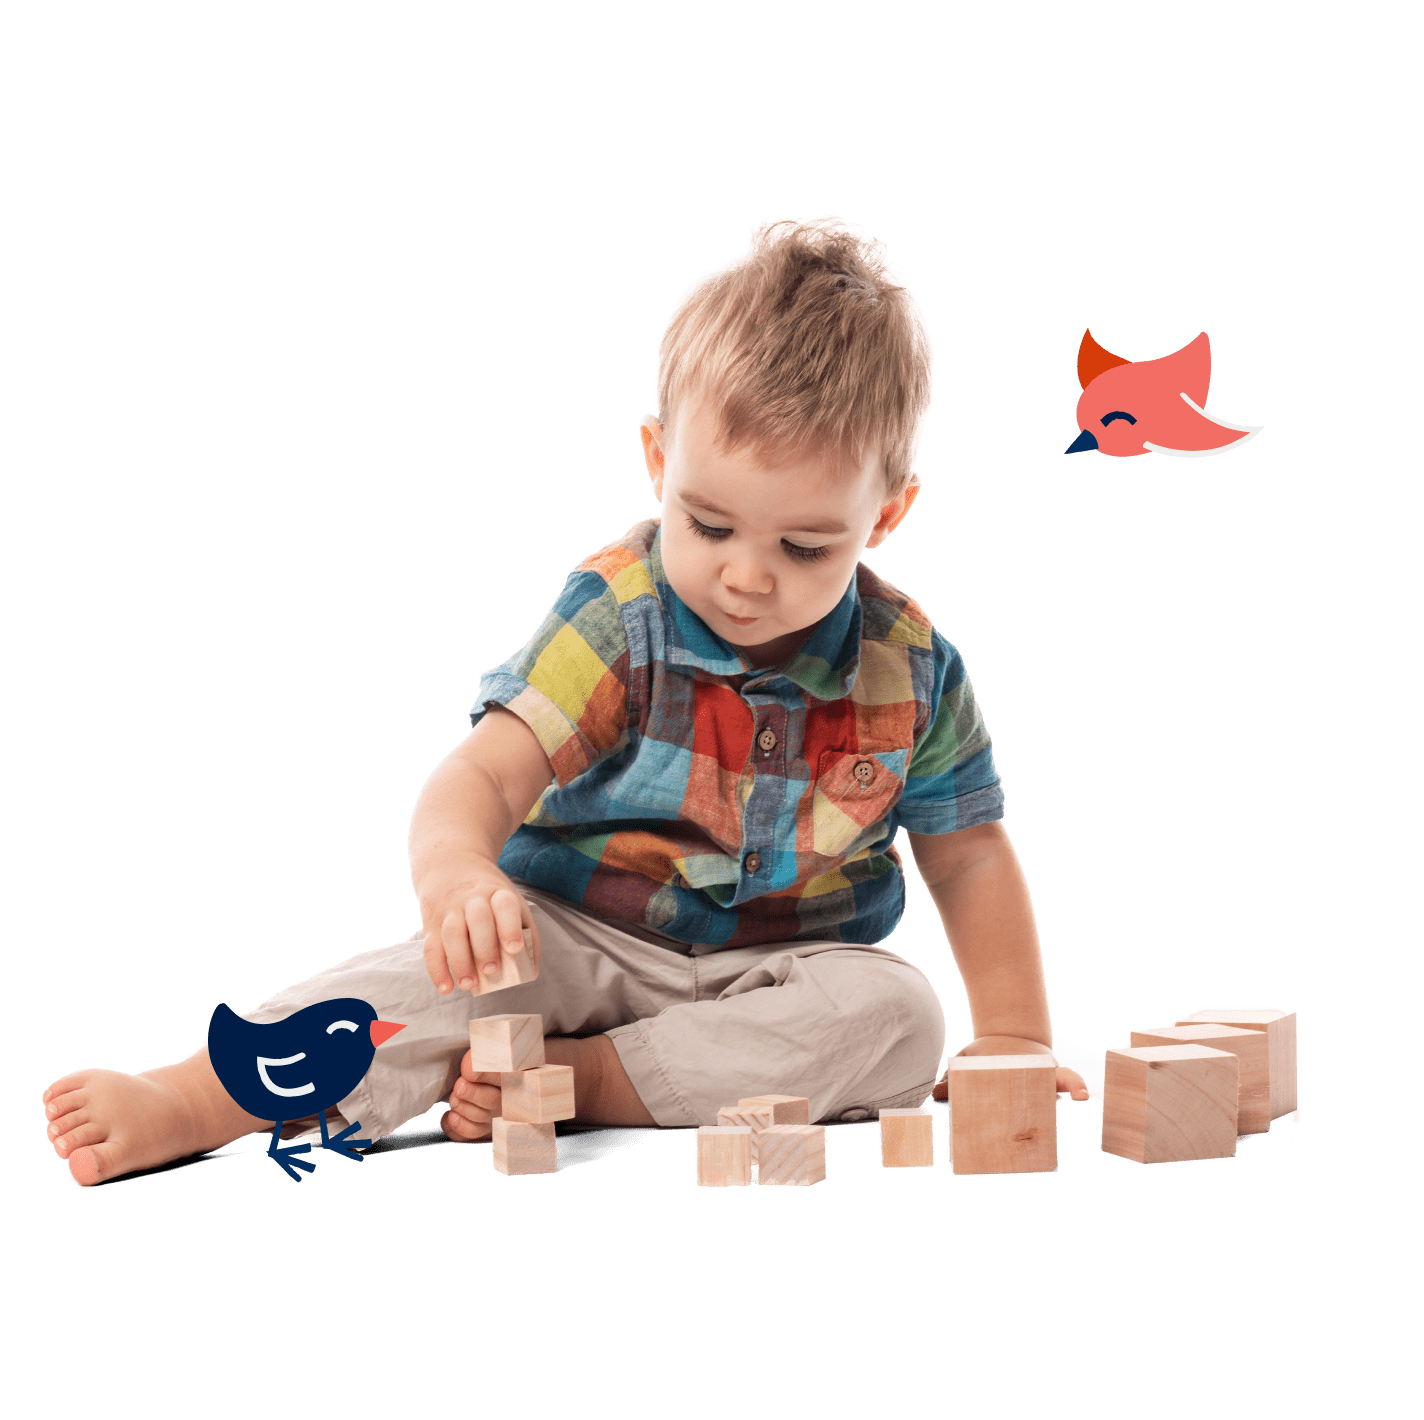 A healthy toddler playing with blocks